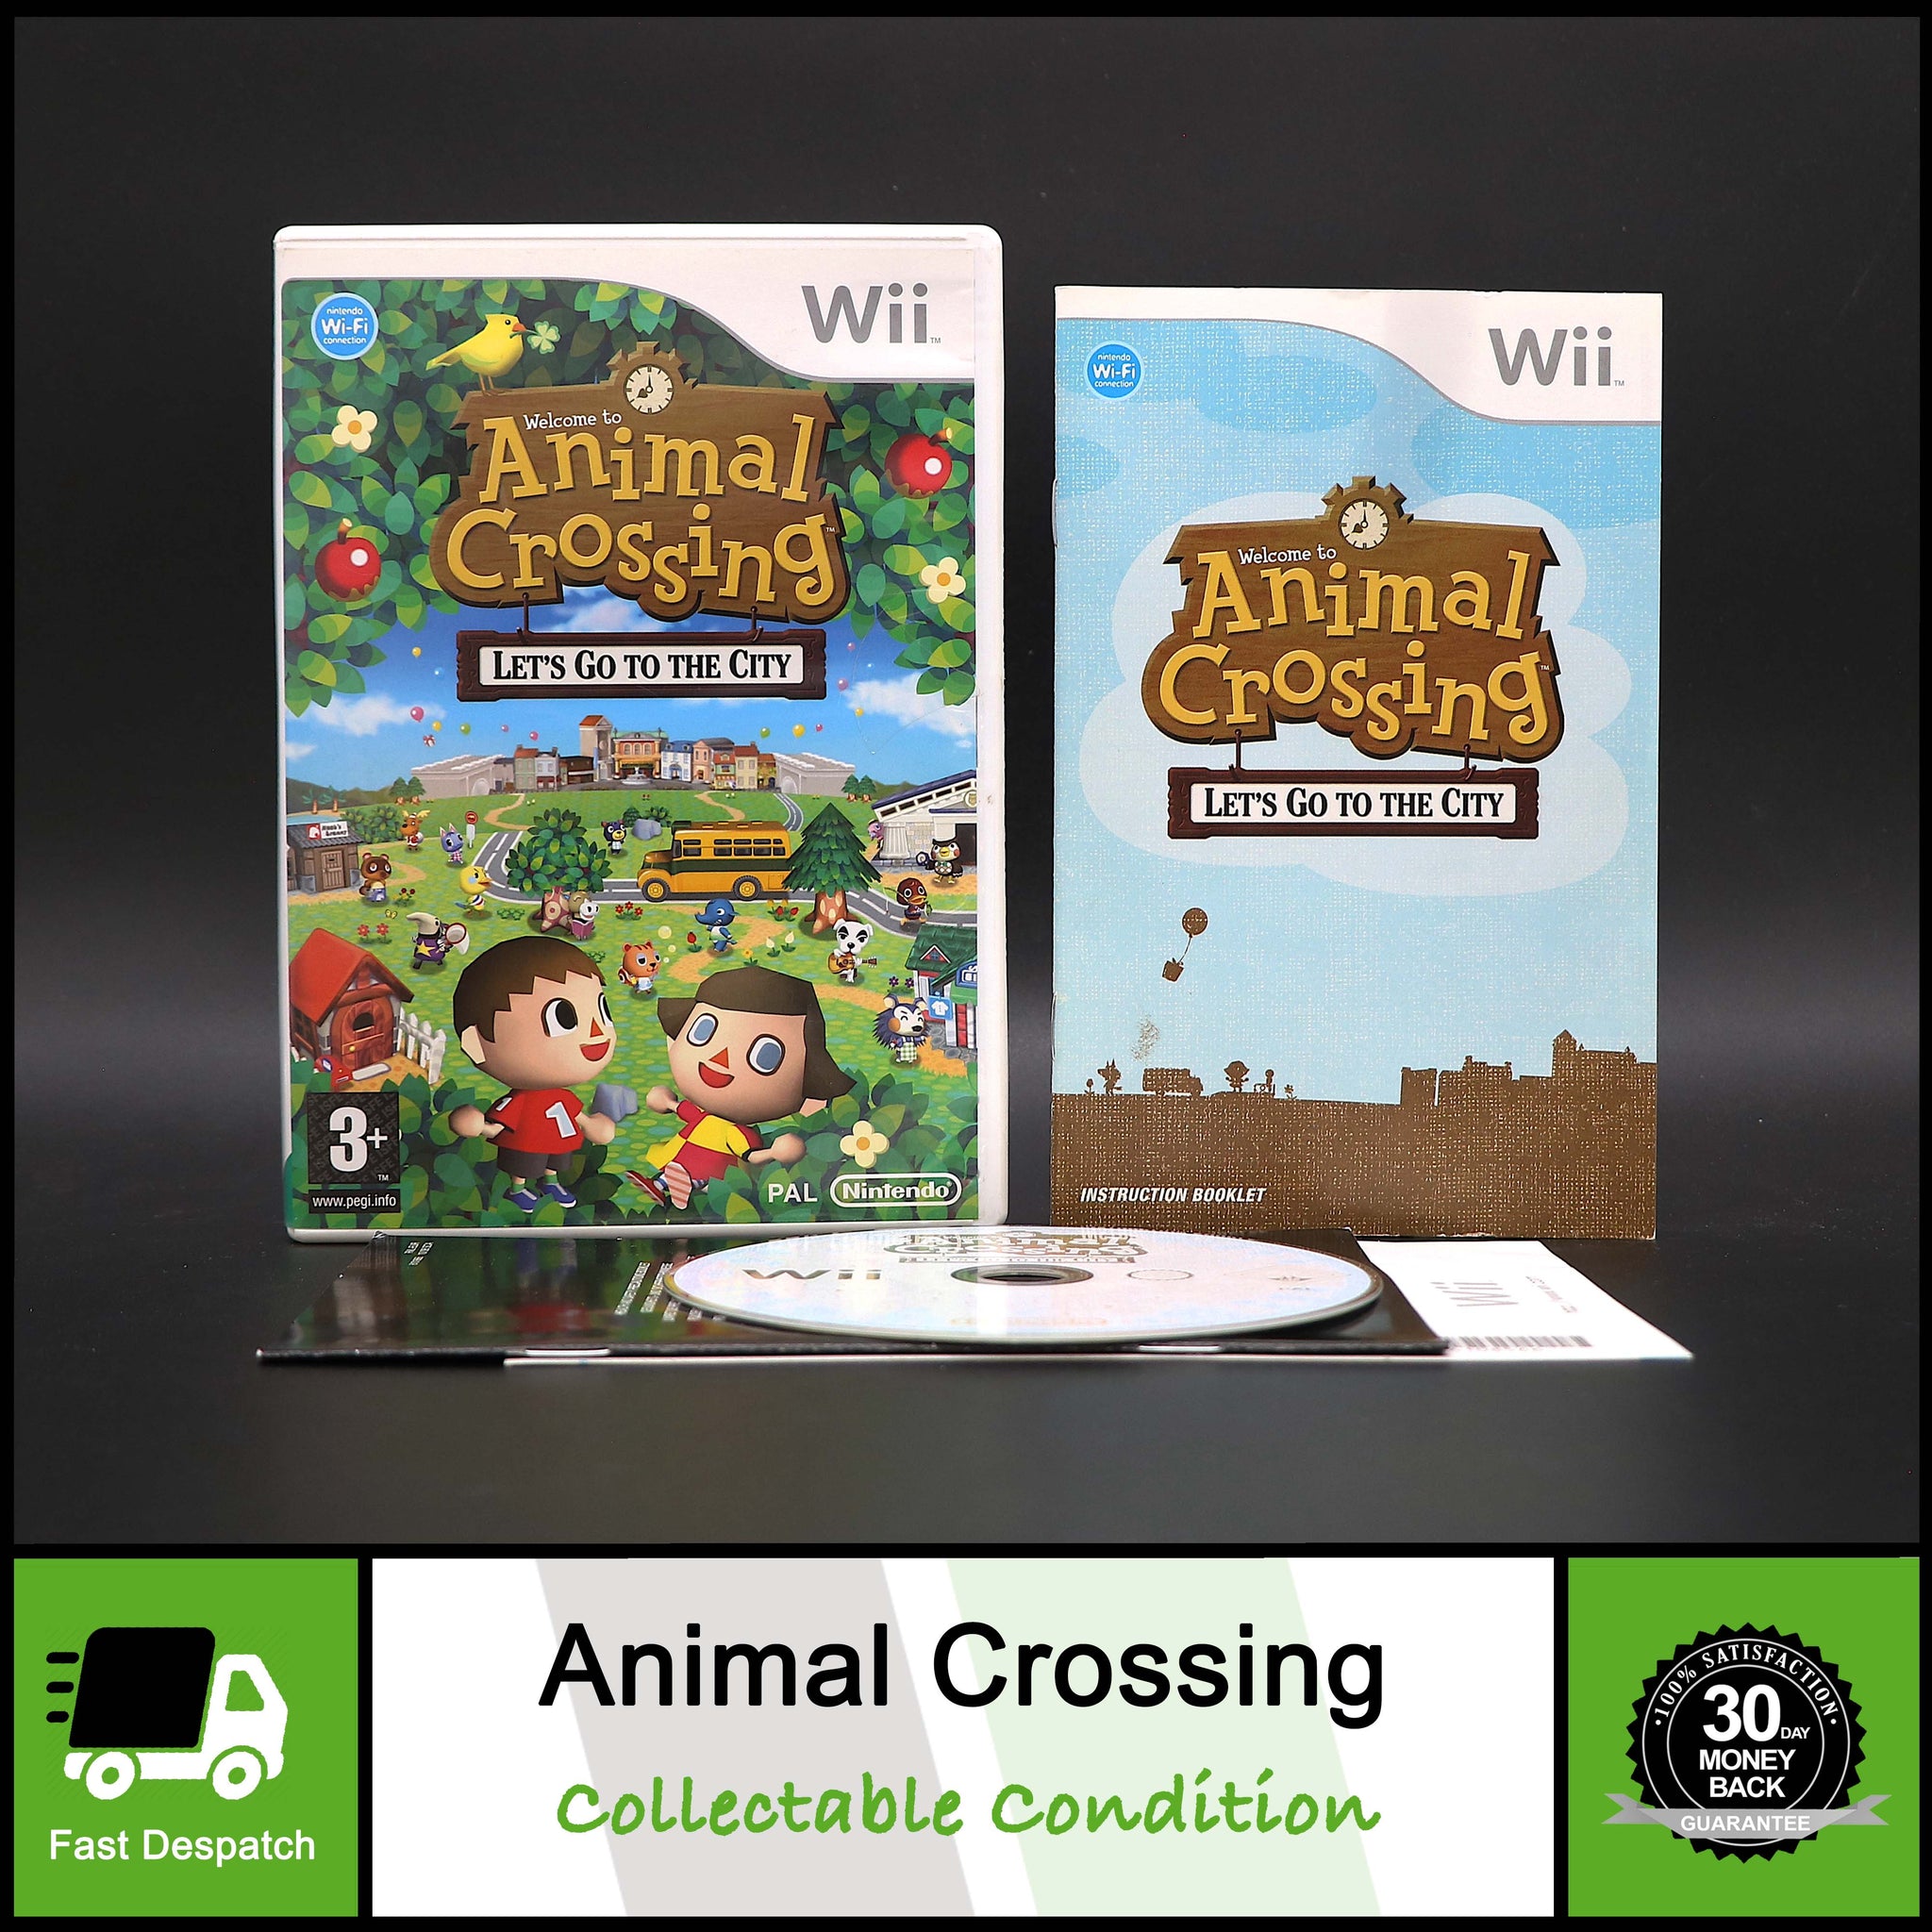 Animal Crossing | Lets Go To The City Nintendo Wii Game | Collectable Condition